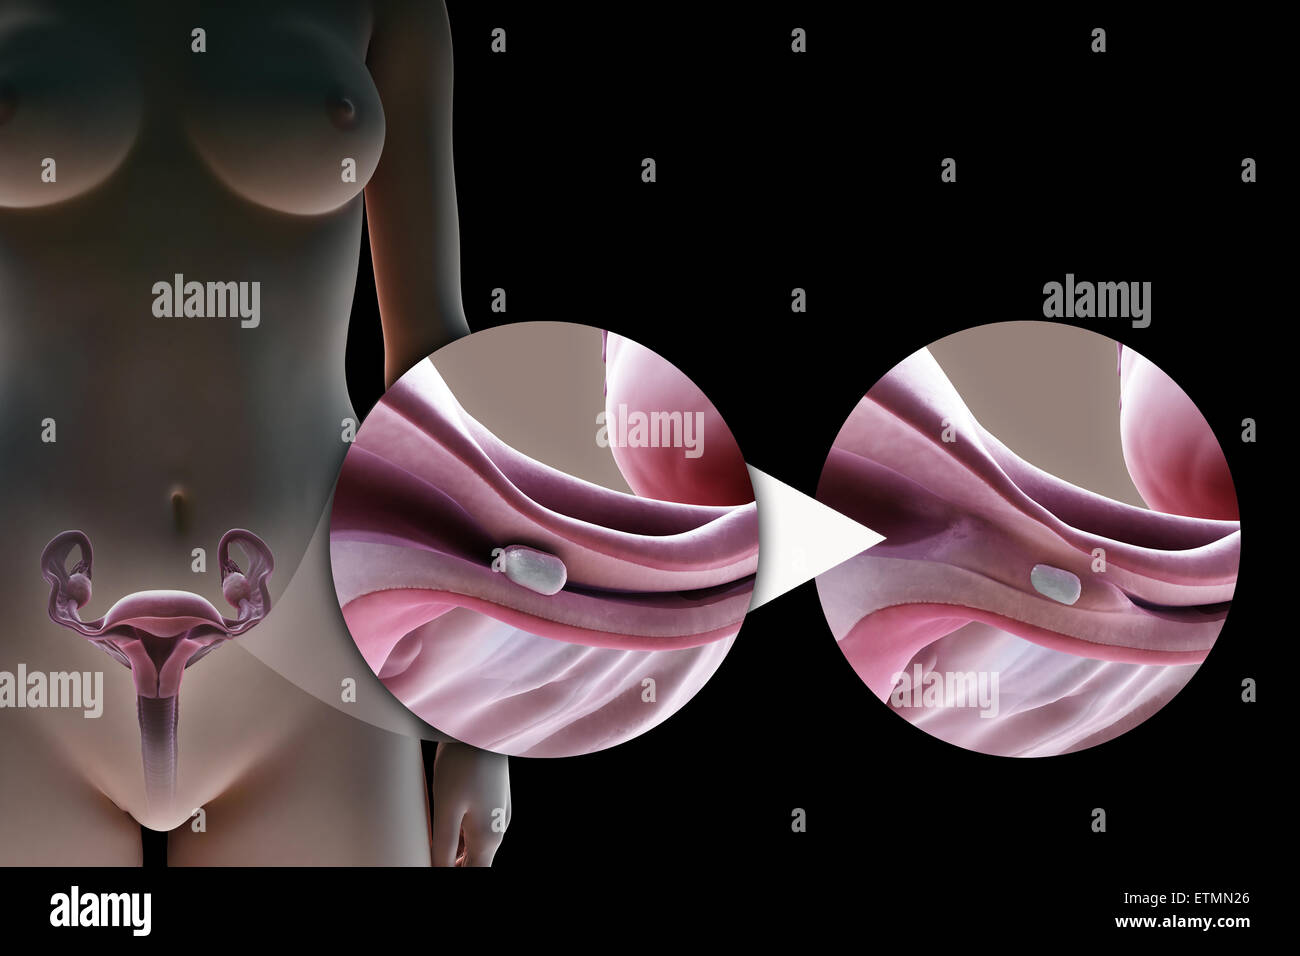 Illustration showing tubal ligation of the Fallopian tube by method of a silicone implant, used to block the tube by the growth of scar tissue and prevent fertilization. Stock Photo